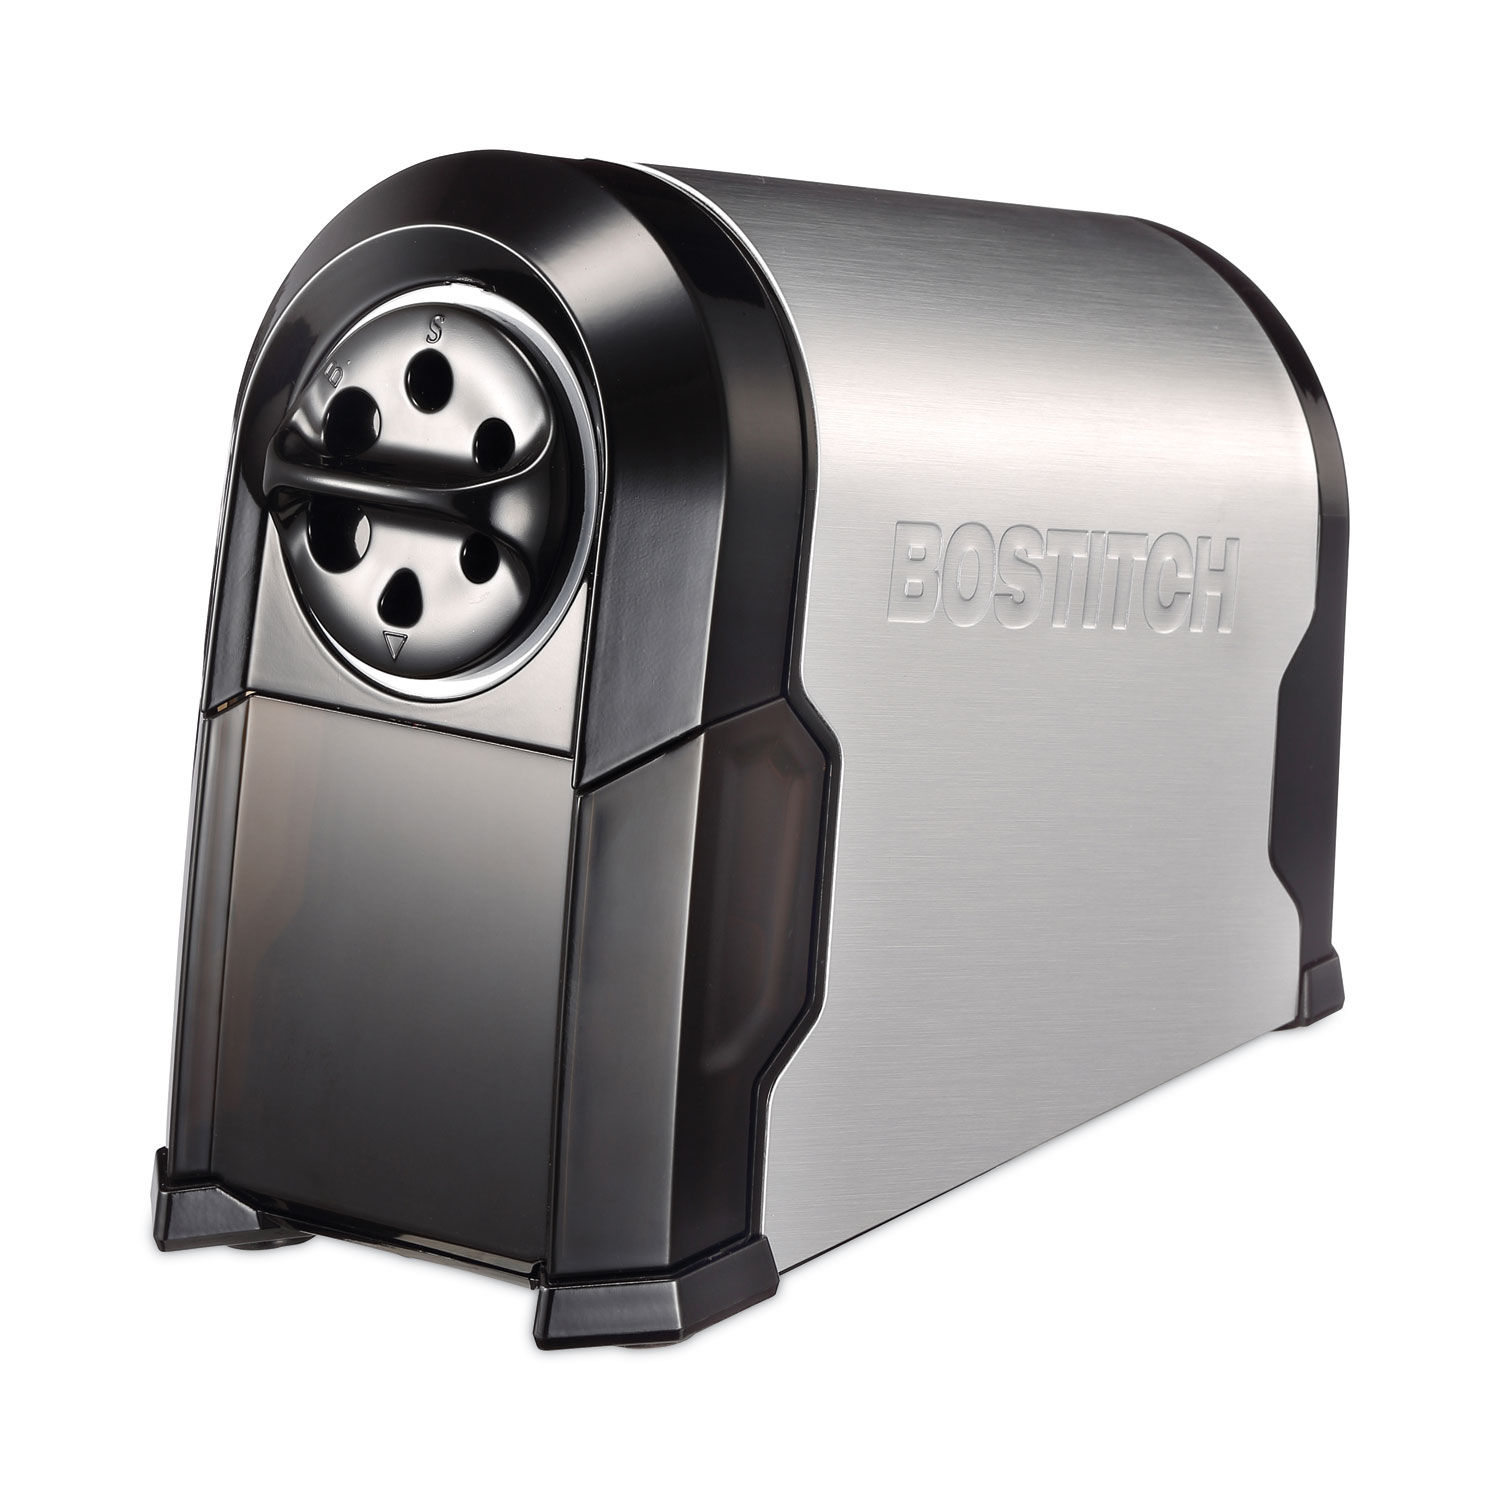 Super Pro Glow Commercial Electric Pencil Sharpener AC-Powered, 6.13 x 10.63 x 9, Black/Silver